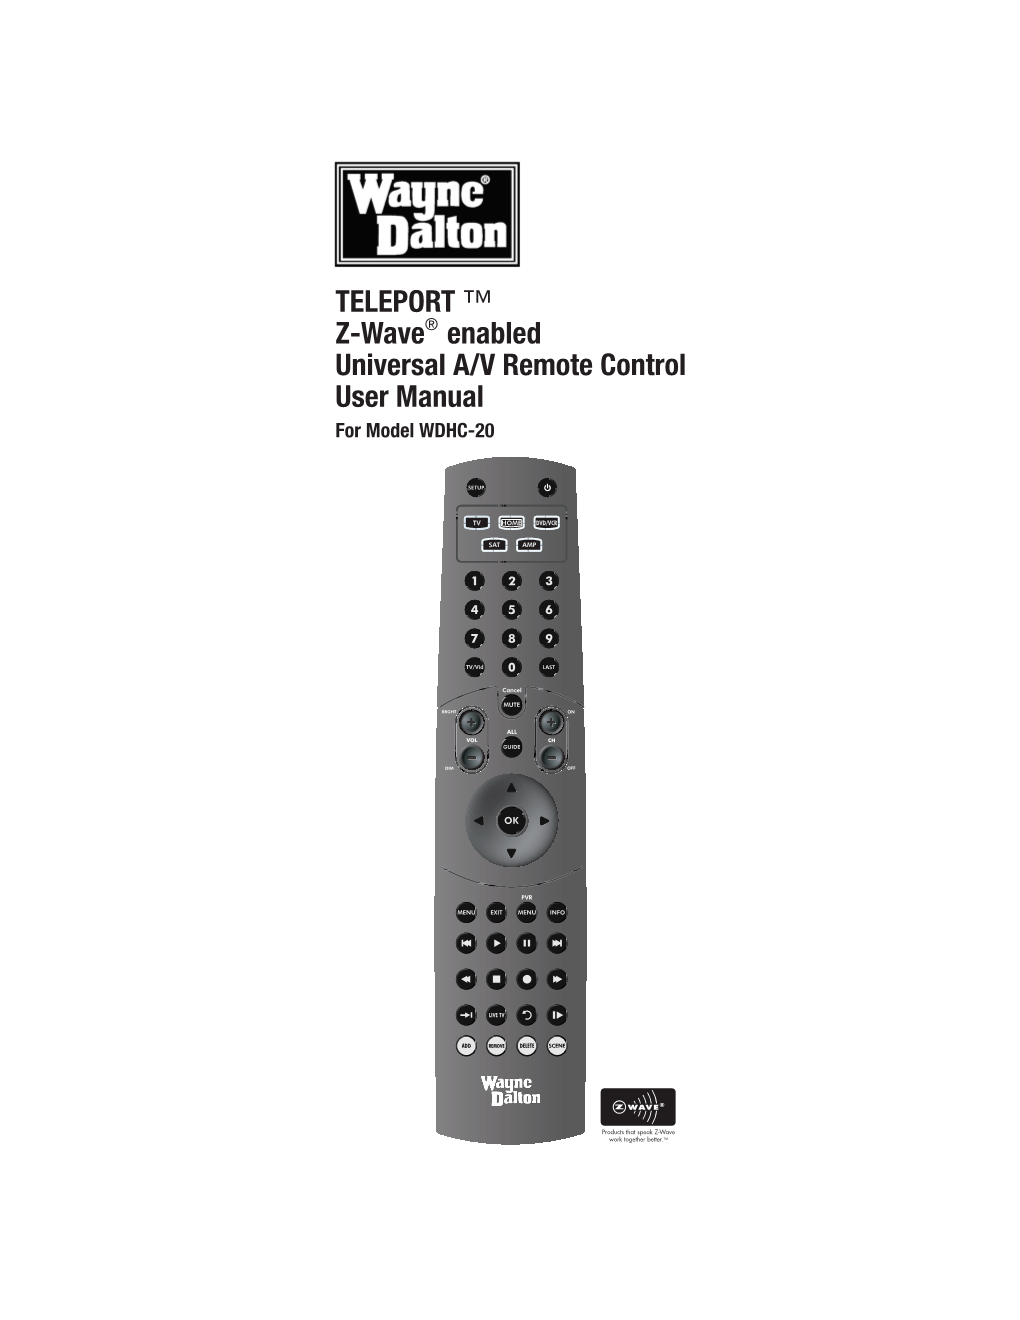 TELEPORT ™ Z-Wave® Enabled Universal A/V Remote Control User Manual for Model WDHC-20 TABLE of CONTENTS